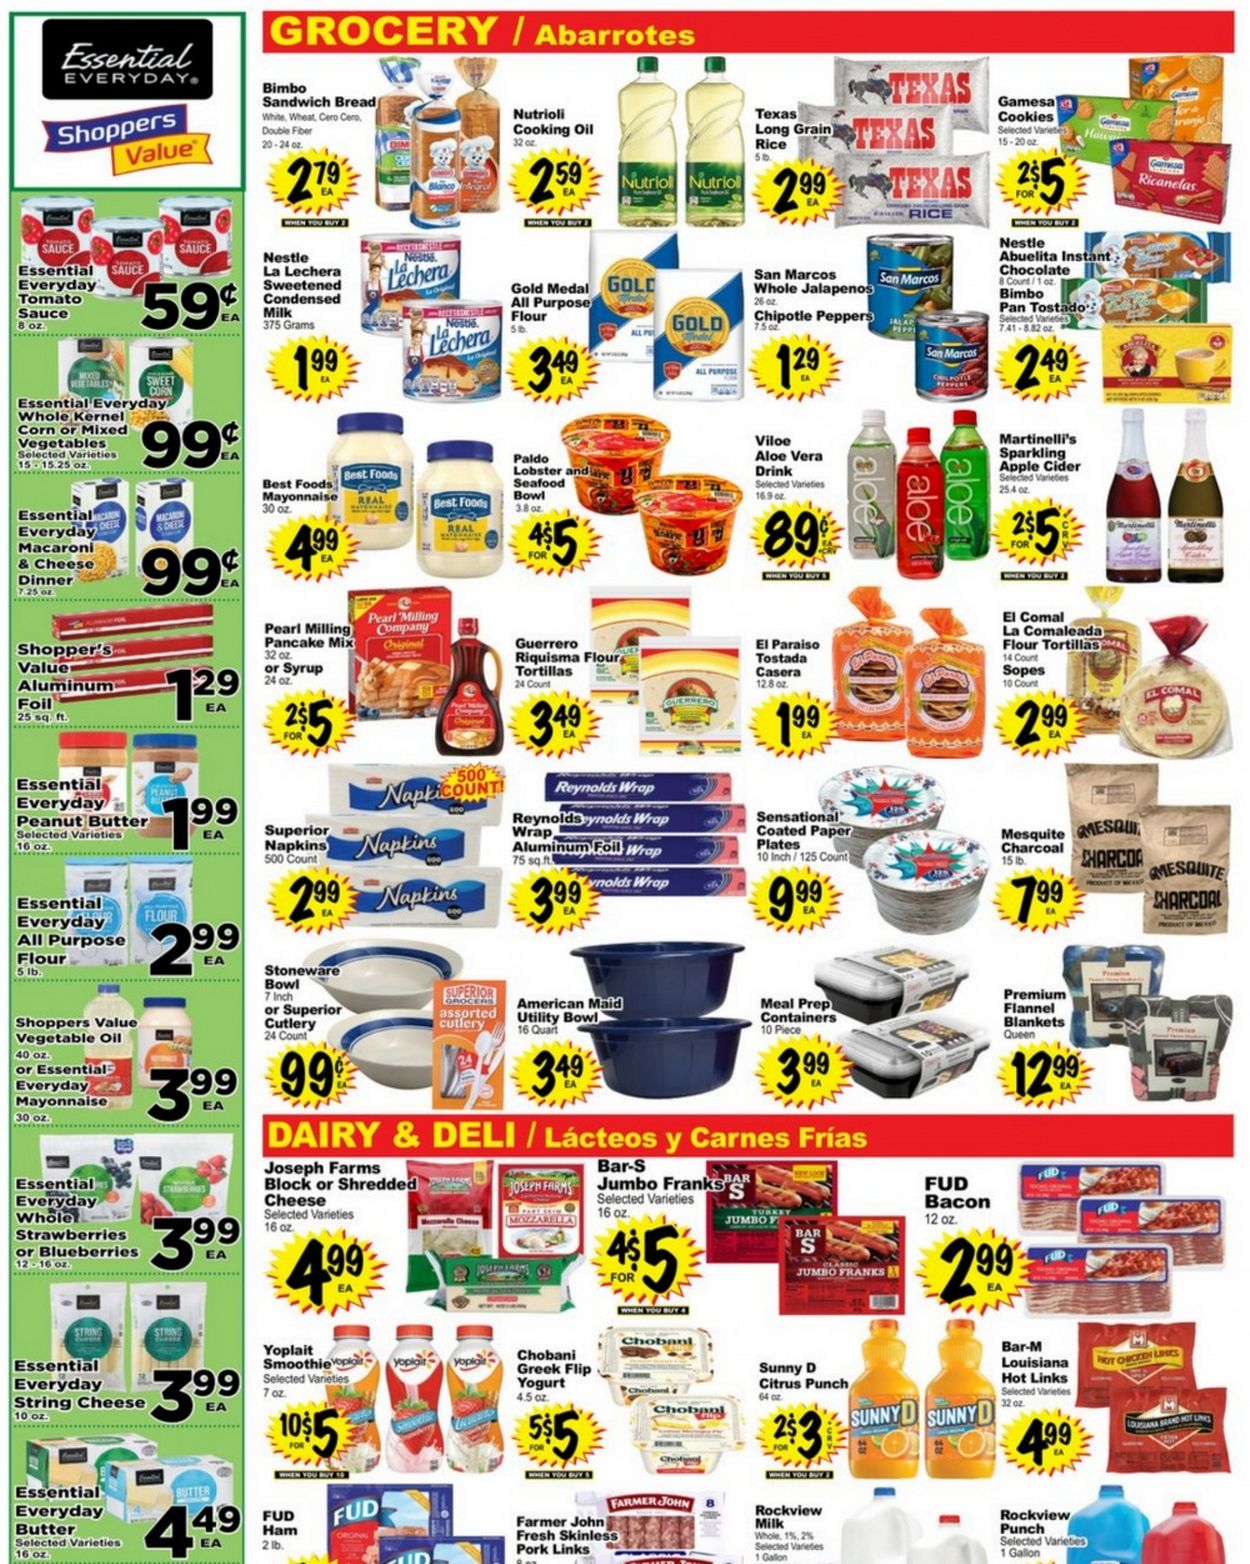 Superior Grocers Christmas July 2024 Weekly Sales, Deals, Discounts and Digital Coupons.